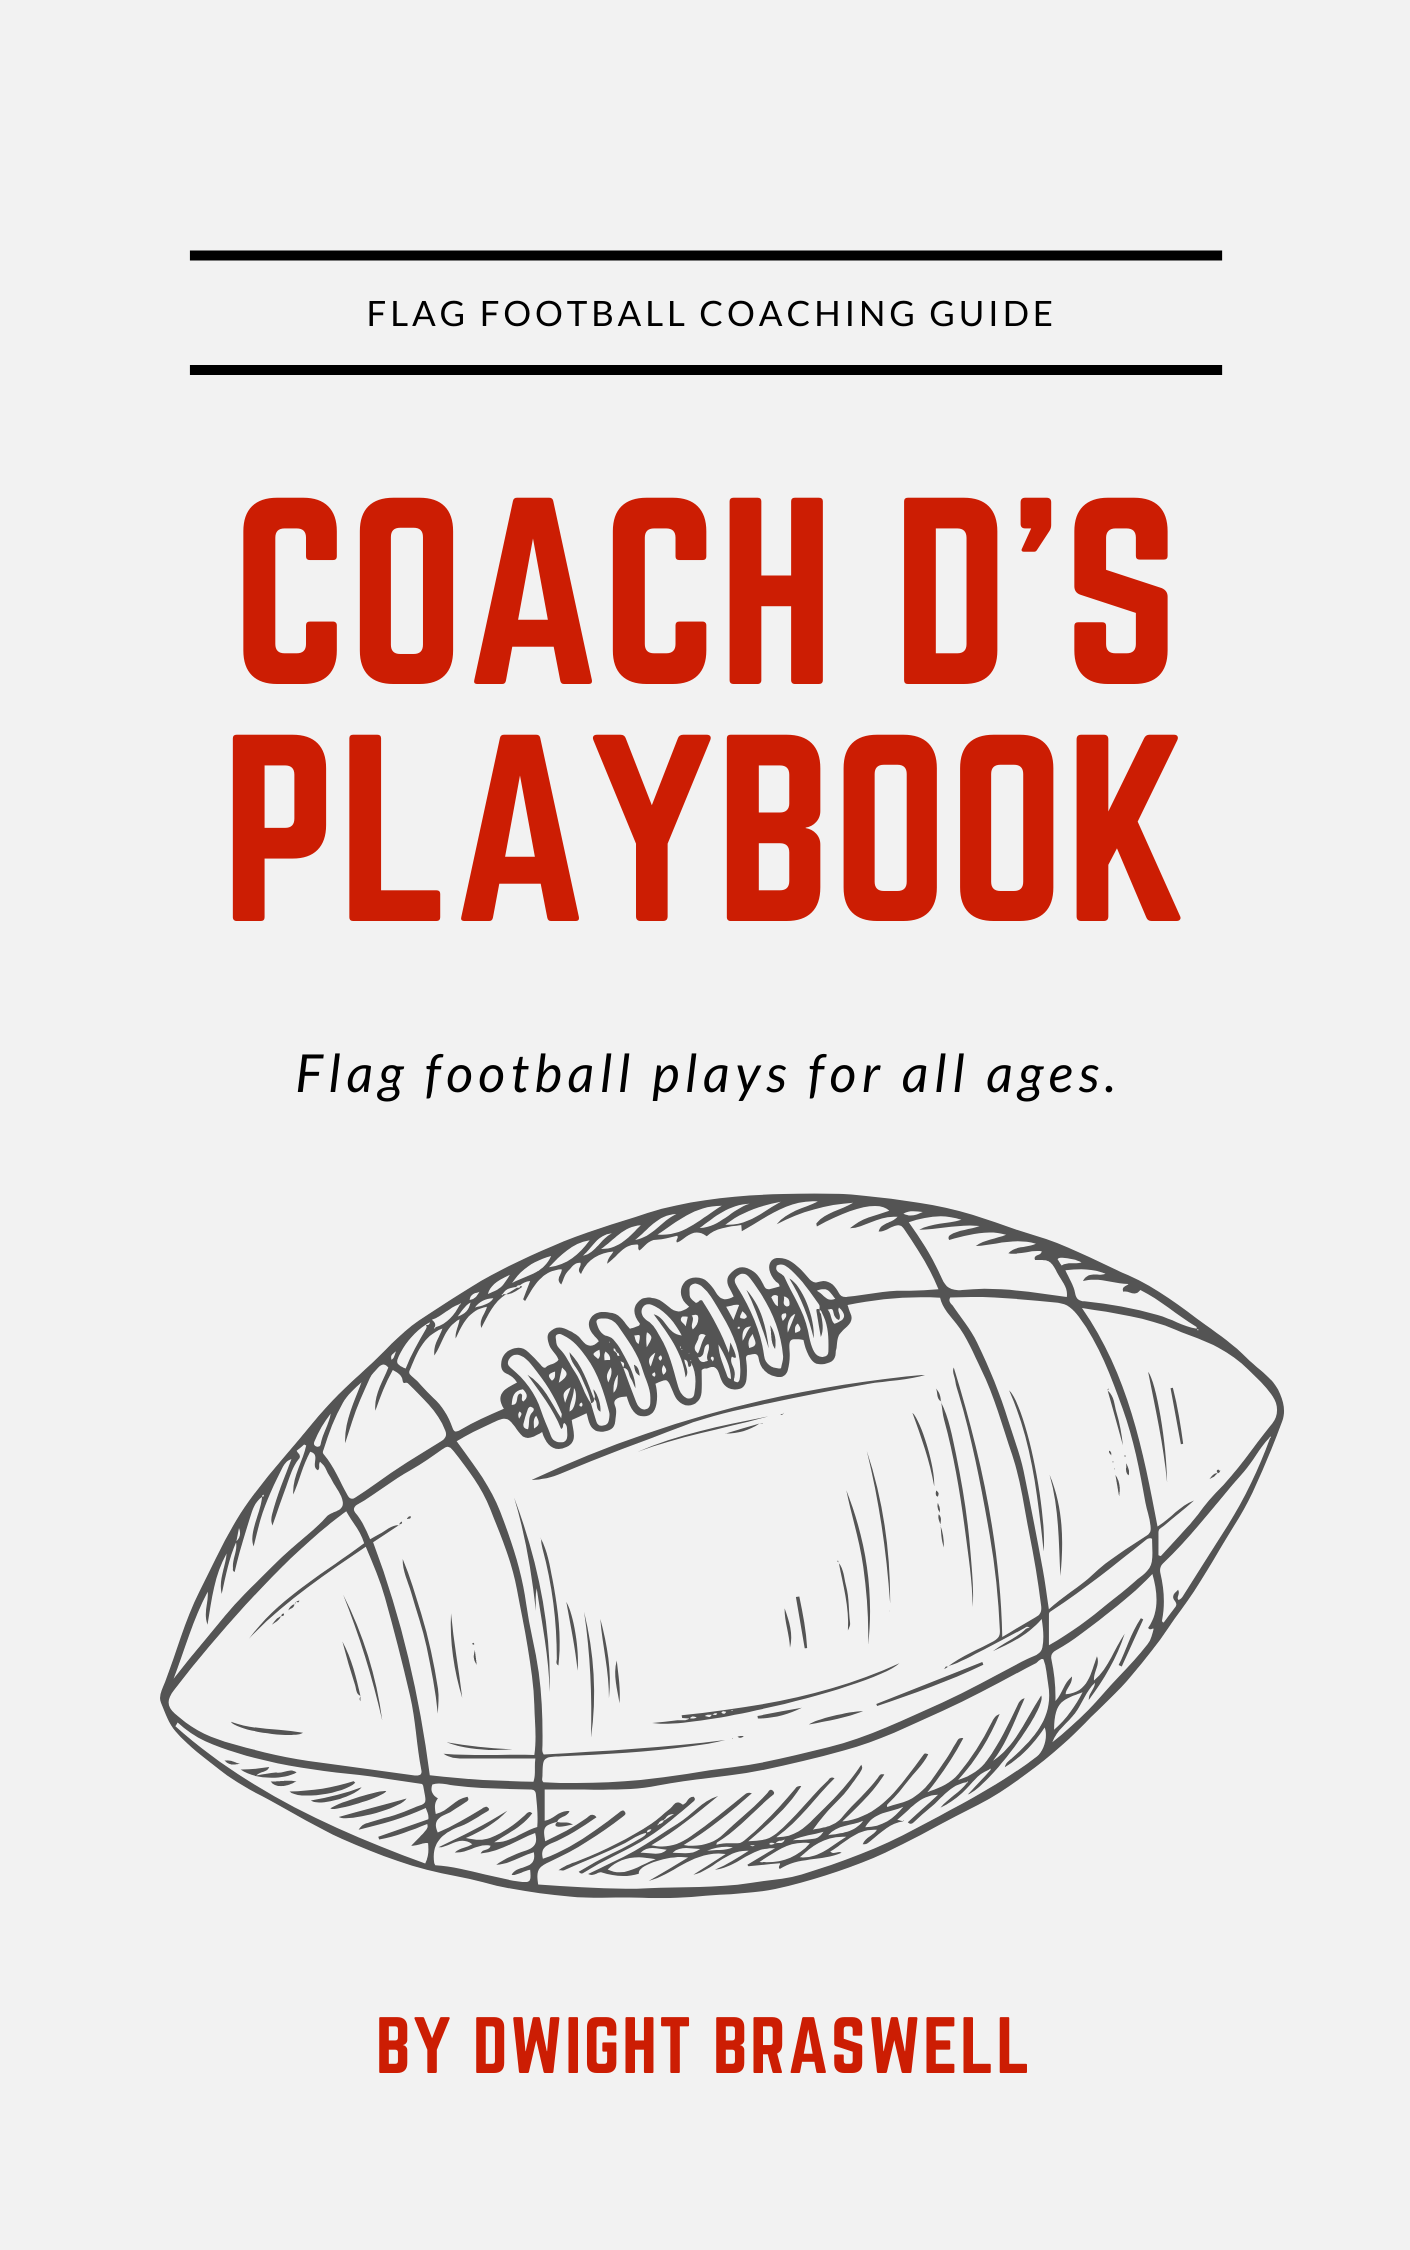 How Many Plays Should be in a Flag Football Team Playbook? – Coach Hero to  Coach Zero